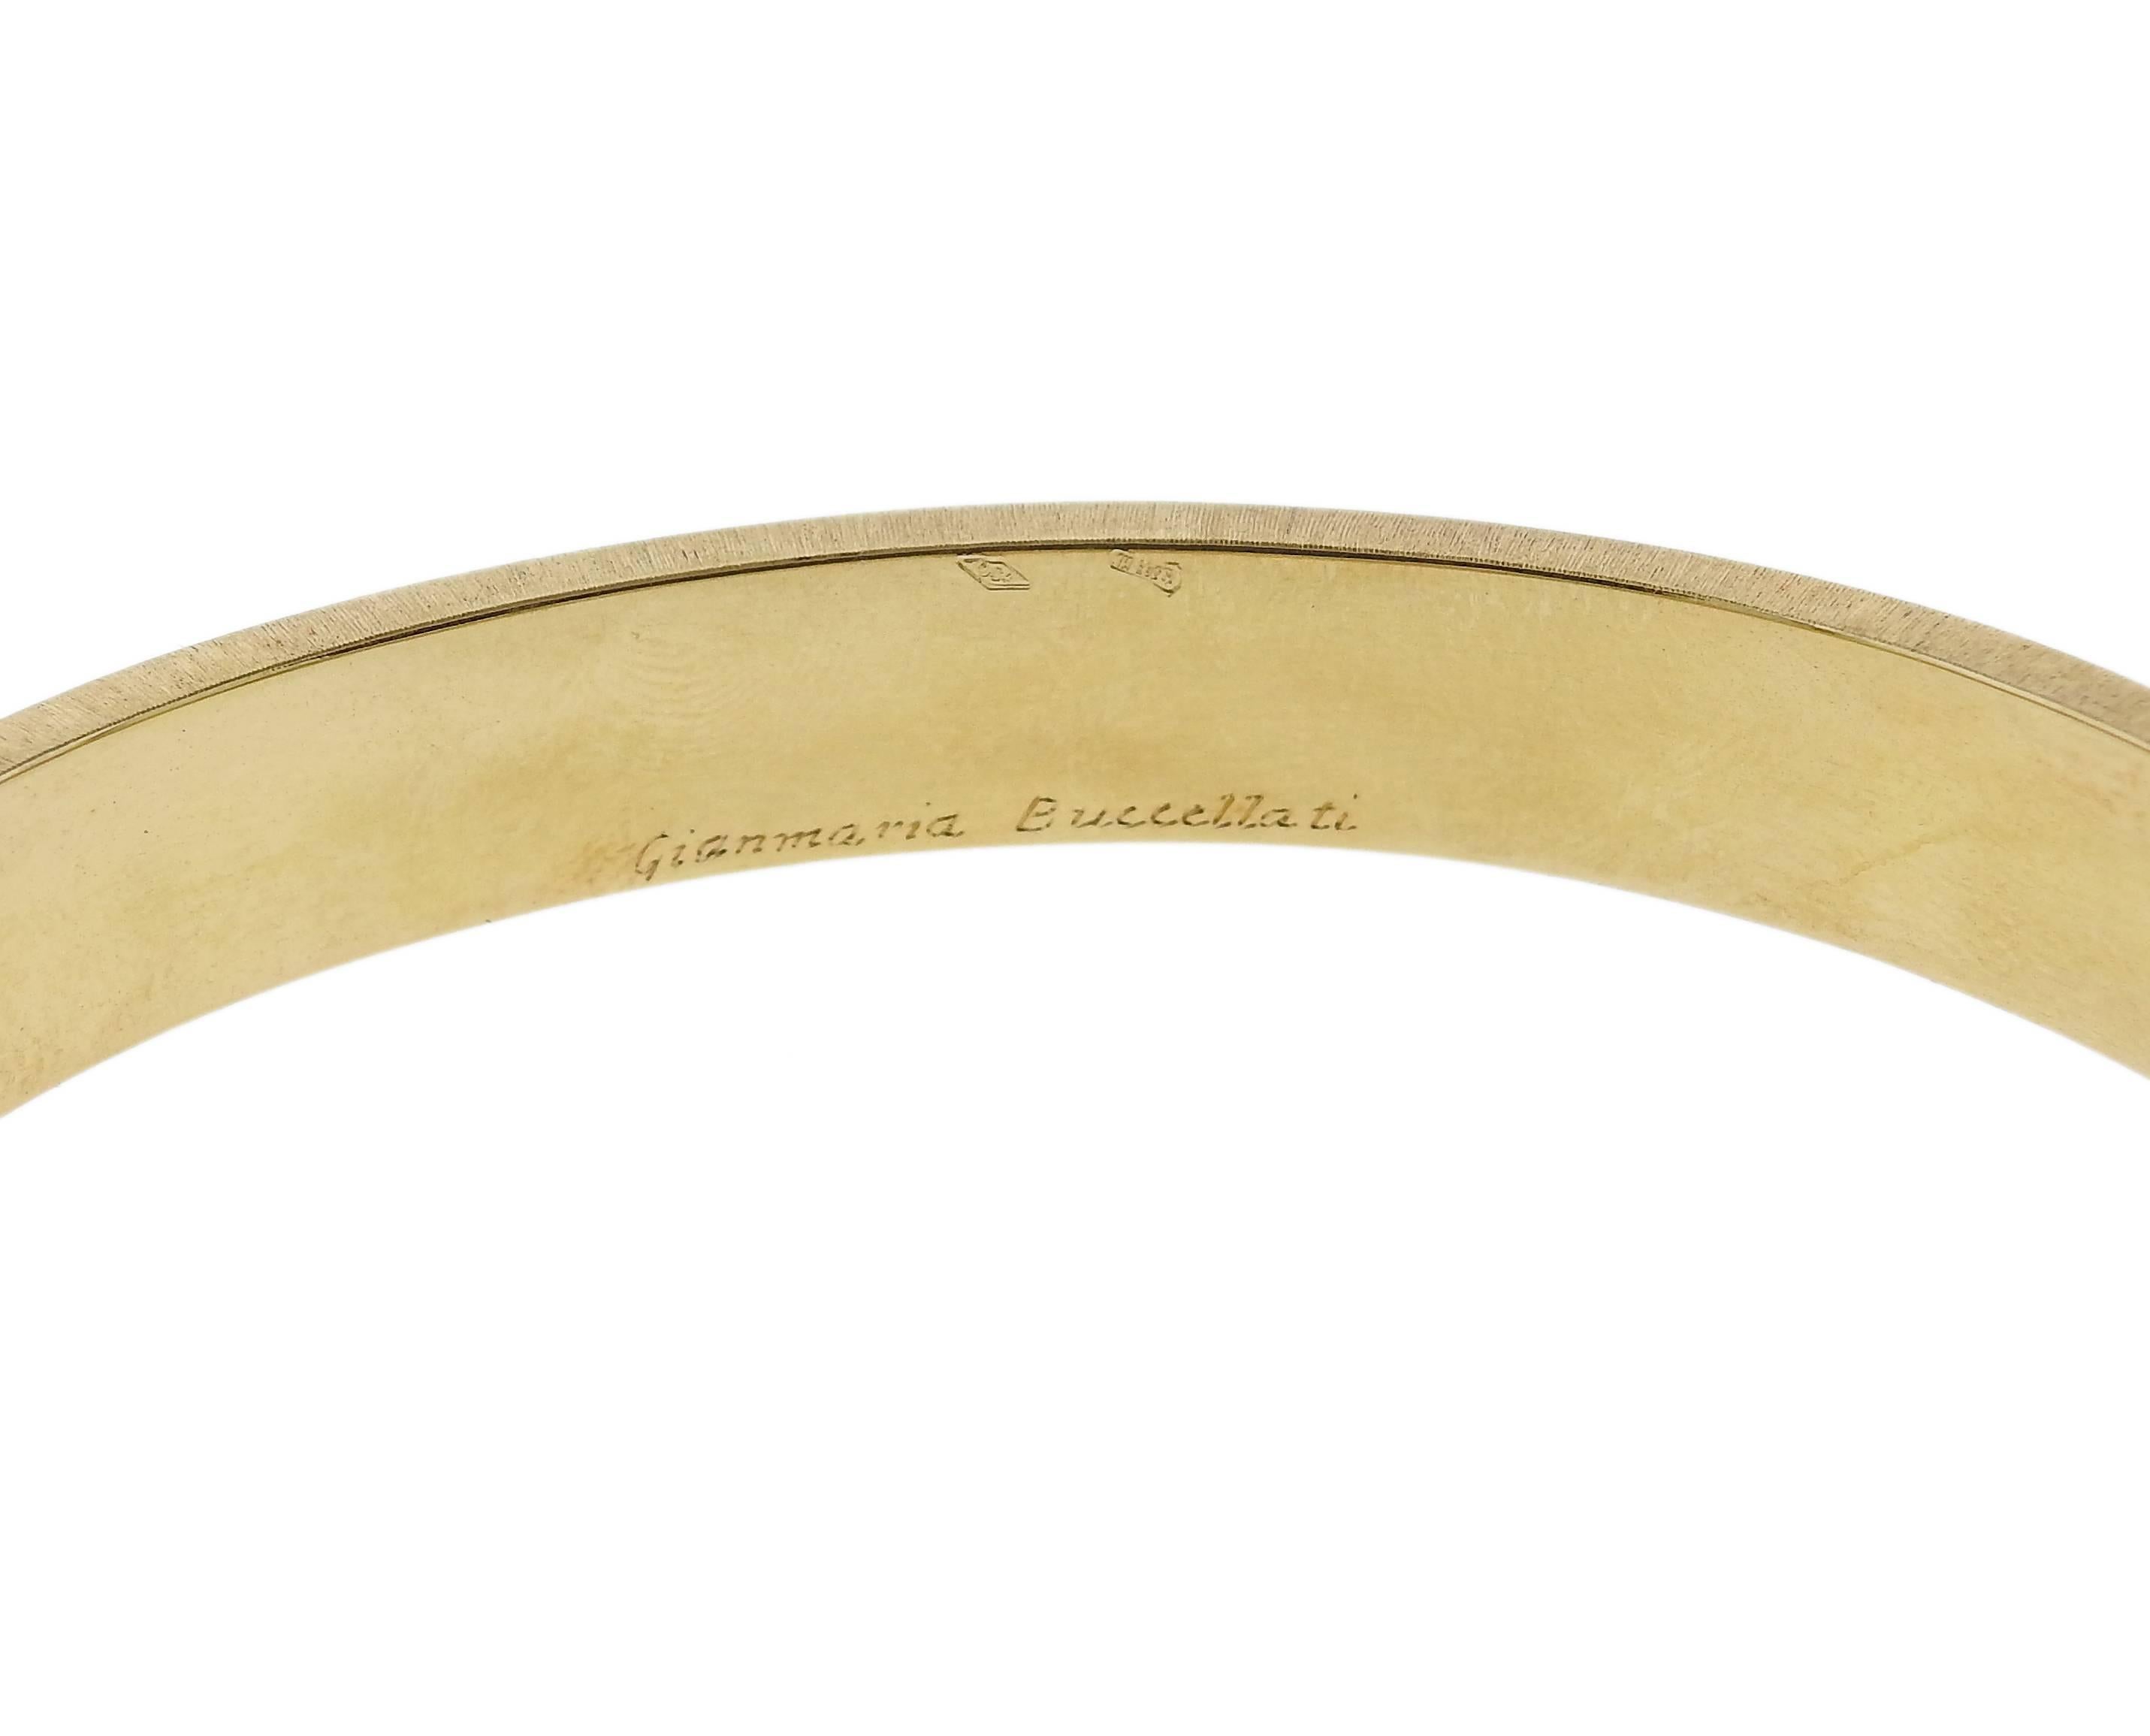 An 18k yellow gold and burnished silver leaf design bangle bracelet, crafted by Buccellati. Bracelet will fit approx. 7